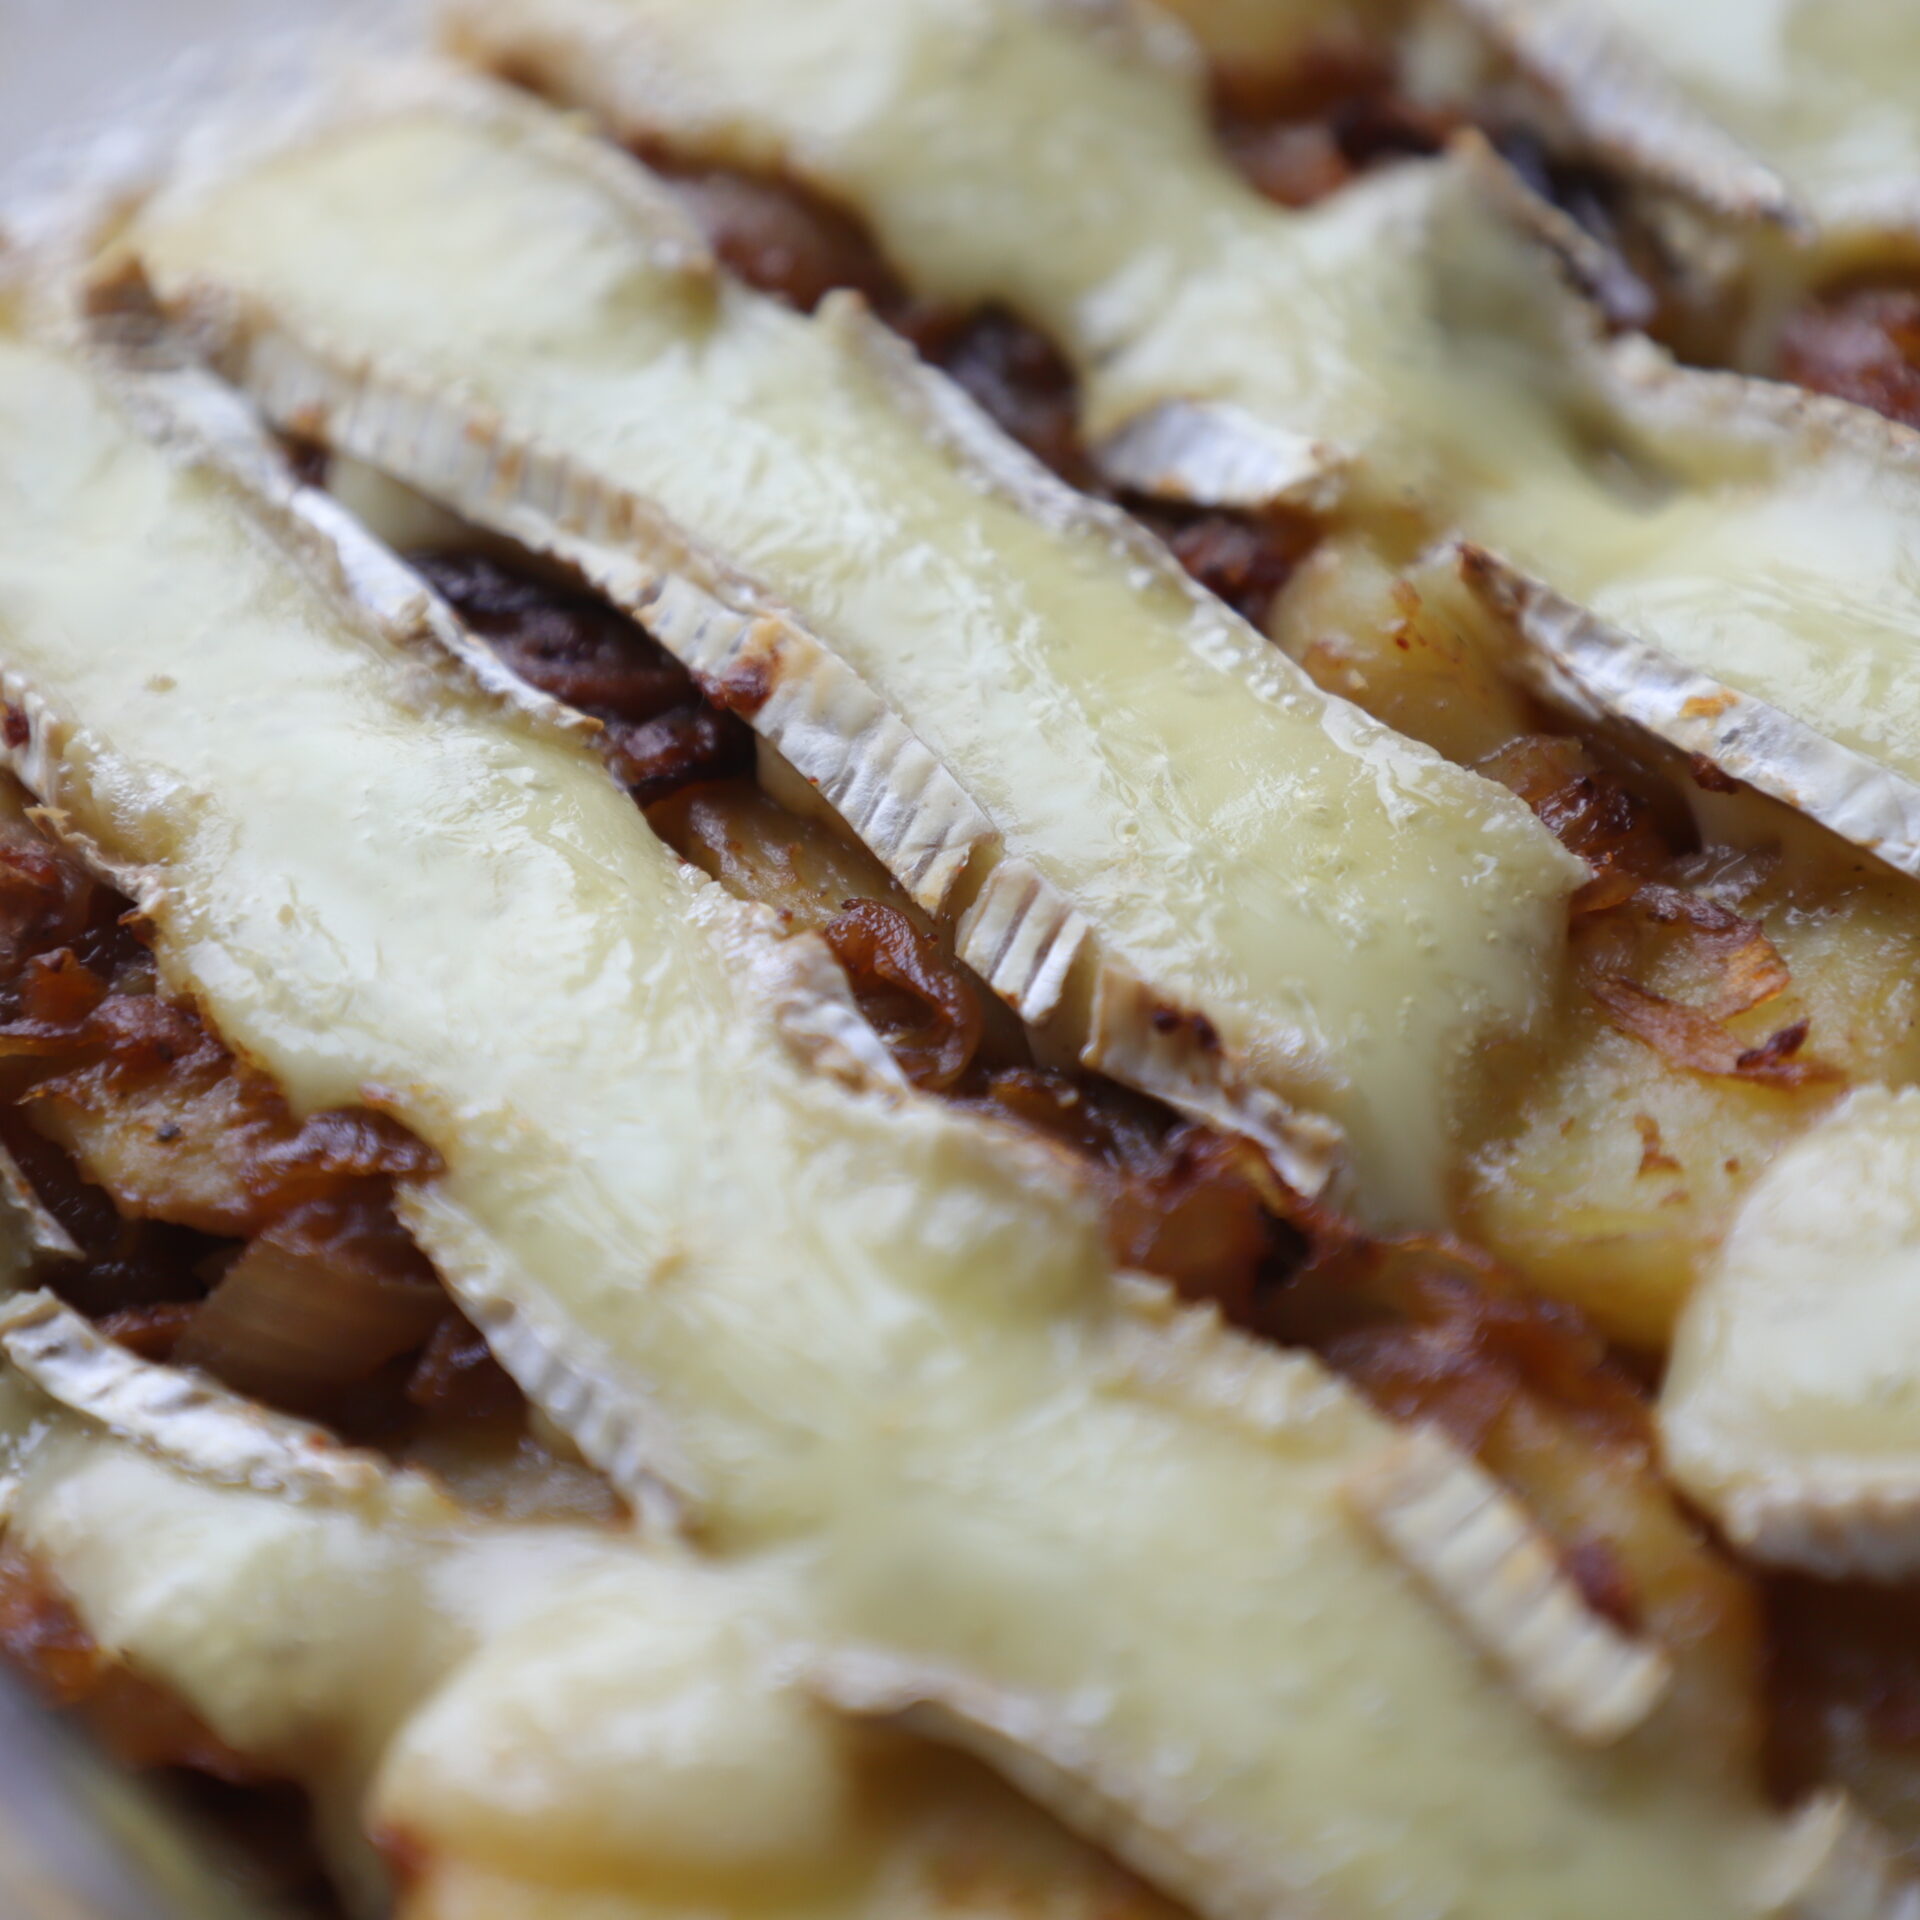 Close up of tartiflette after baking and showing shiny, gooey cheese slices.